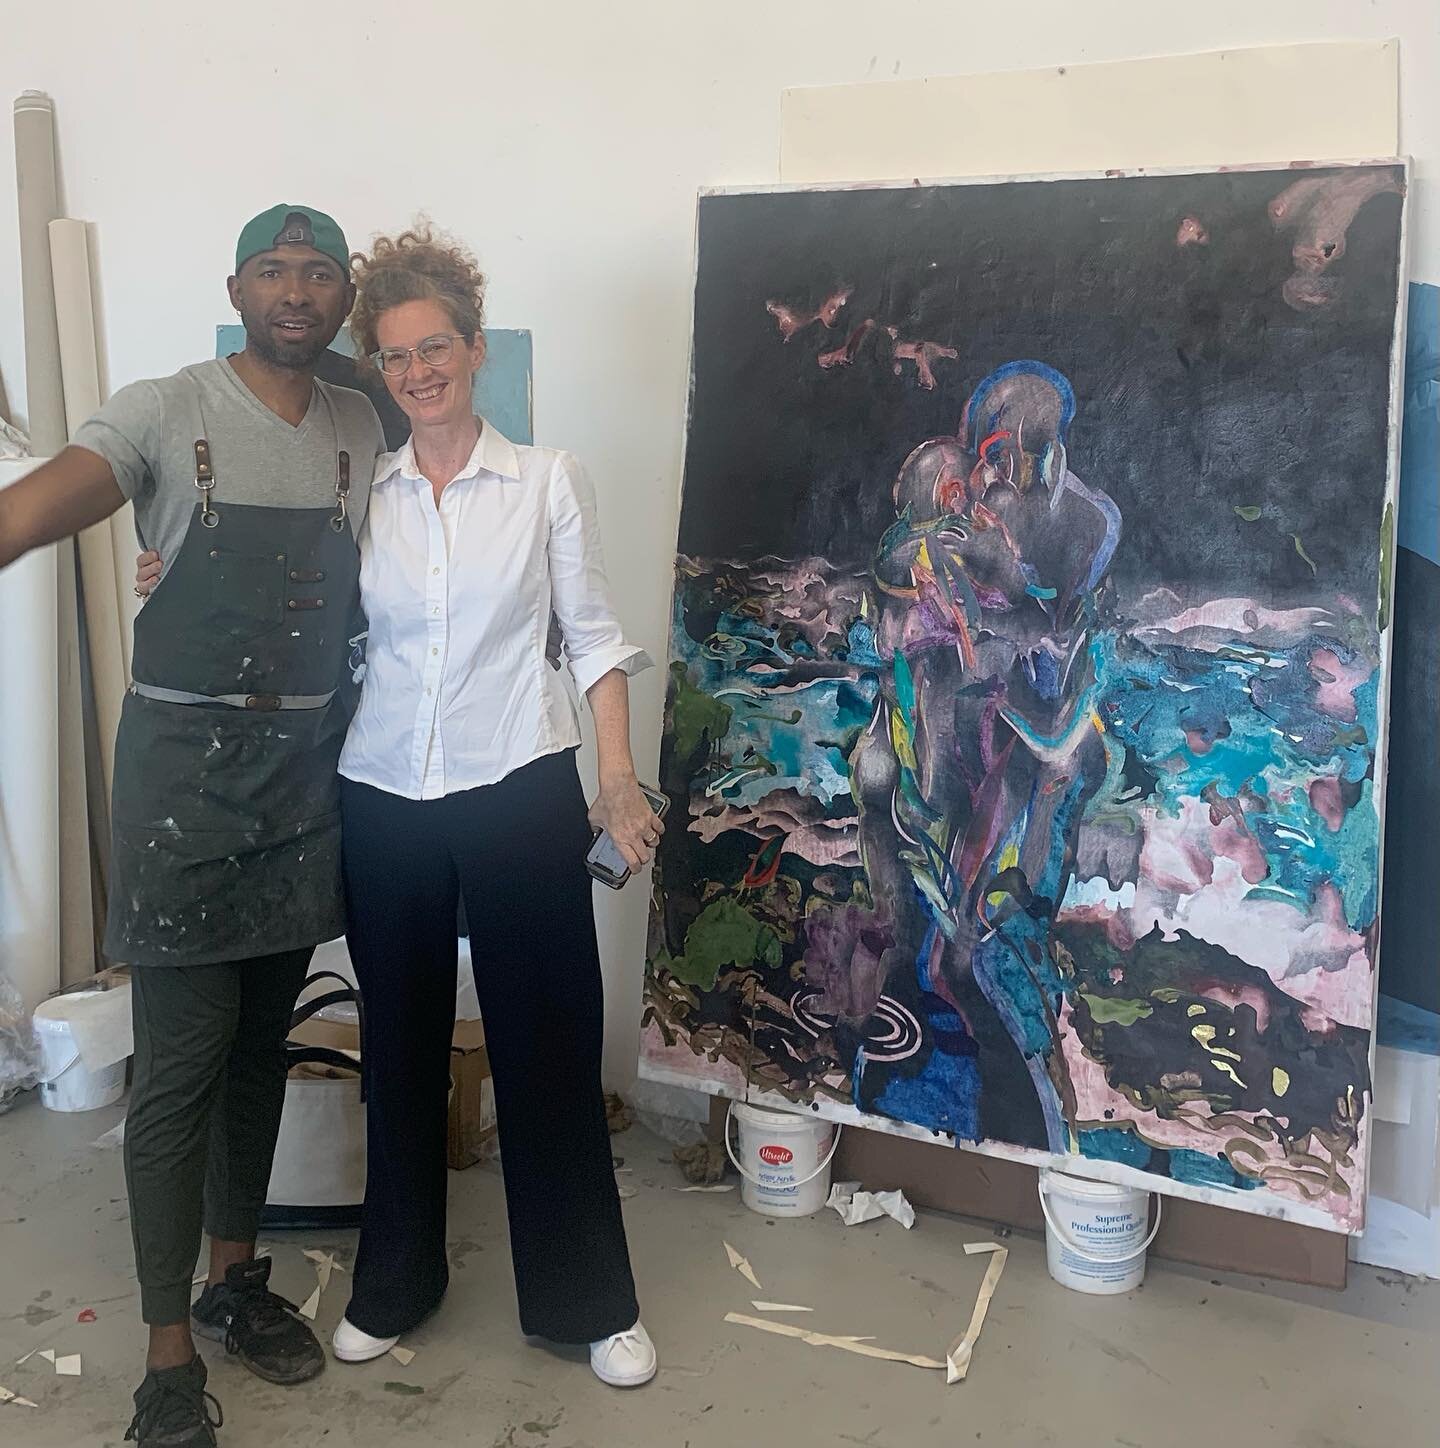 Which of us as art lovers doesn&rsquo;t enjoy a meaningful studio visit exploring the powerful work of Leasho Johnson with Nassau, Bahamas gallerist Amanda Coulson&hellip;can&rsquo;t think of a better way to spend a very productive afternoon! #contem